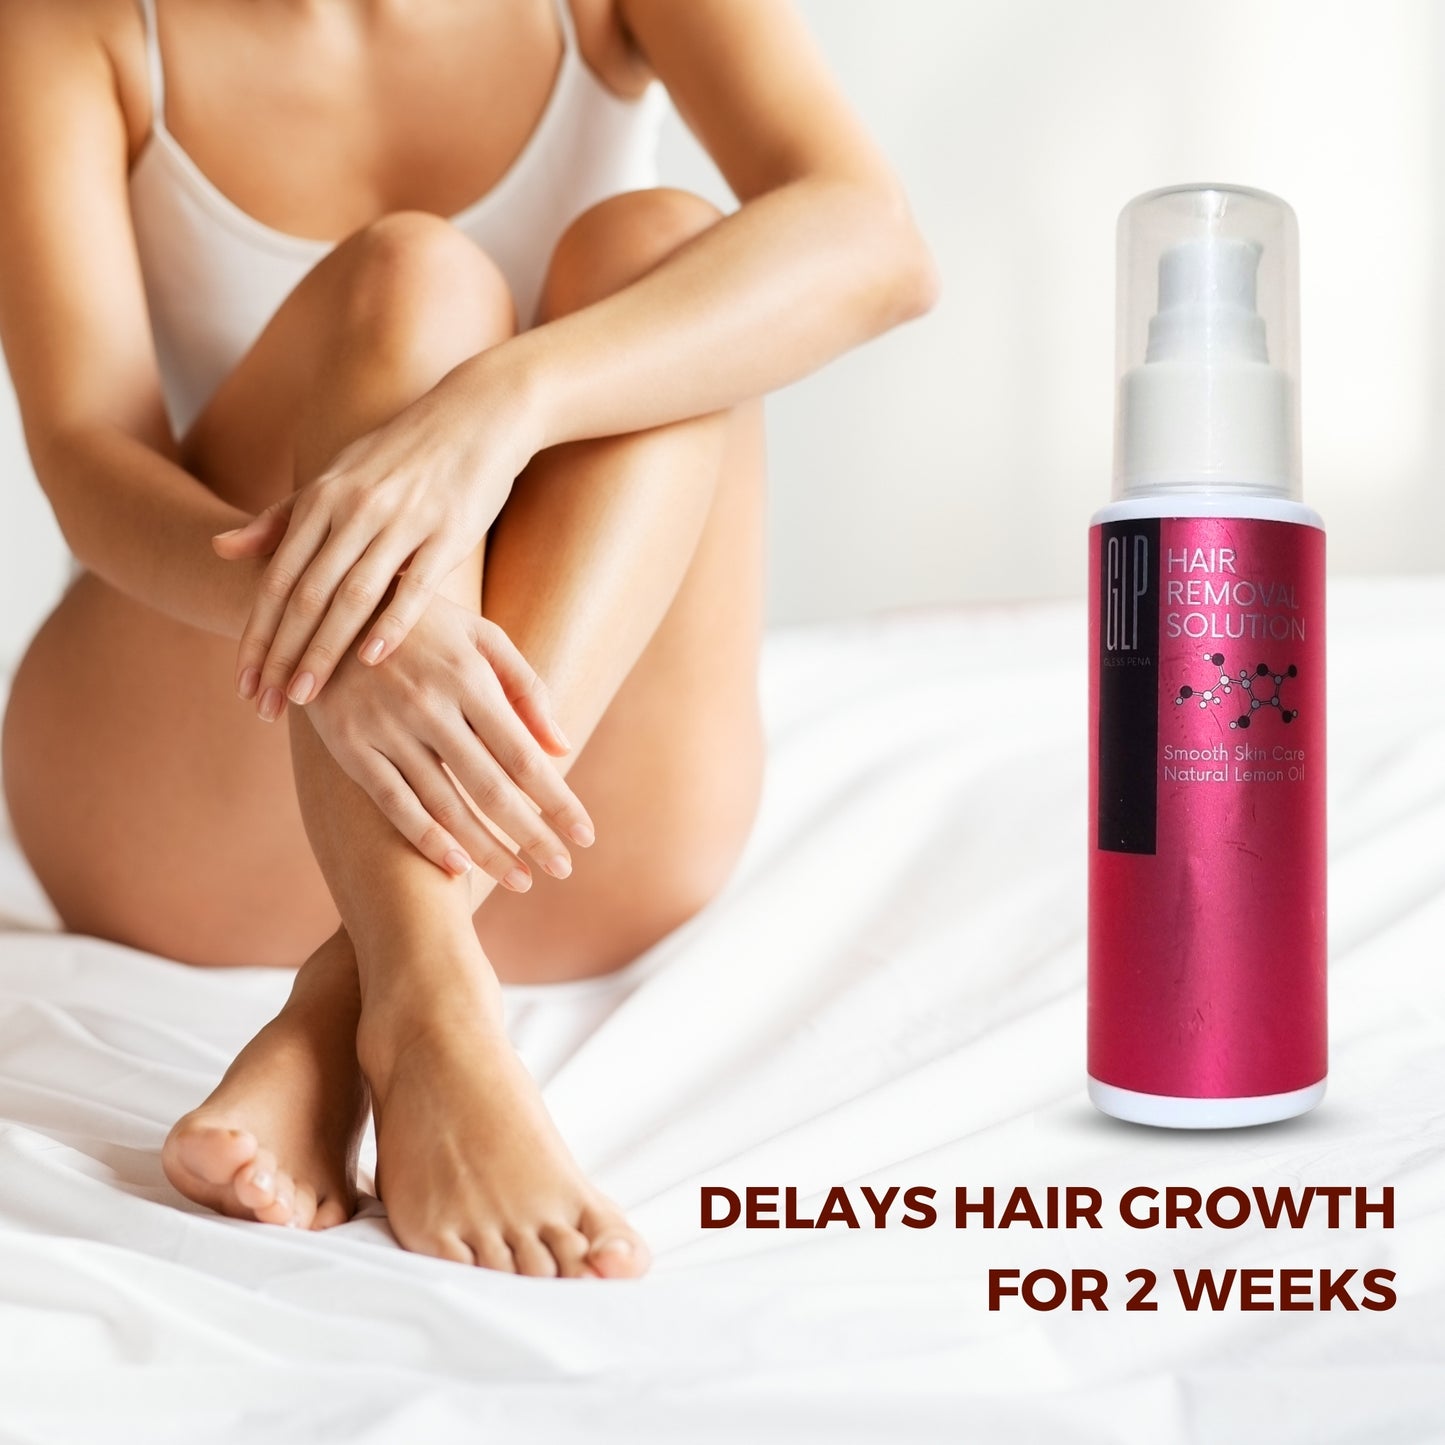 Hair Removal Solution for Women